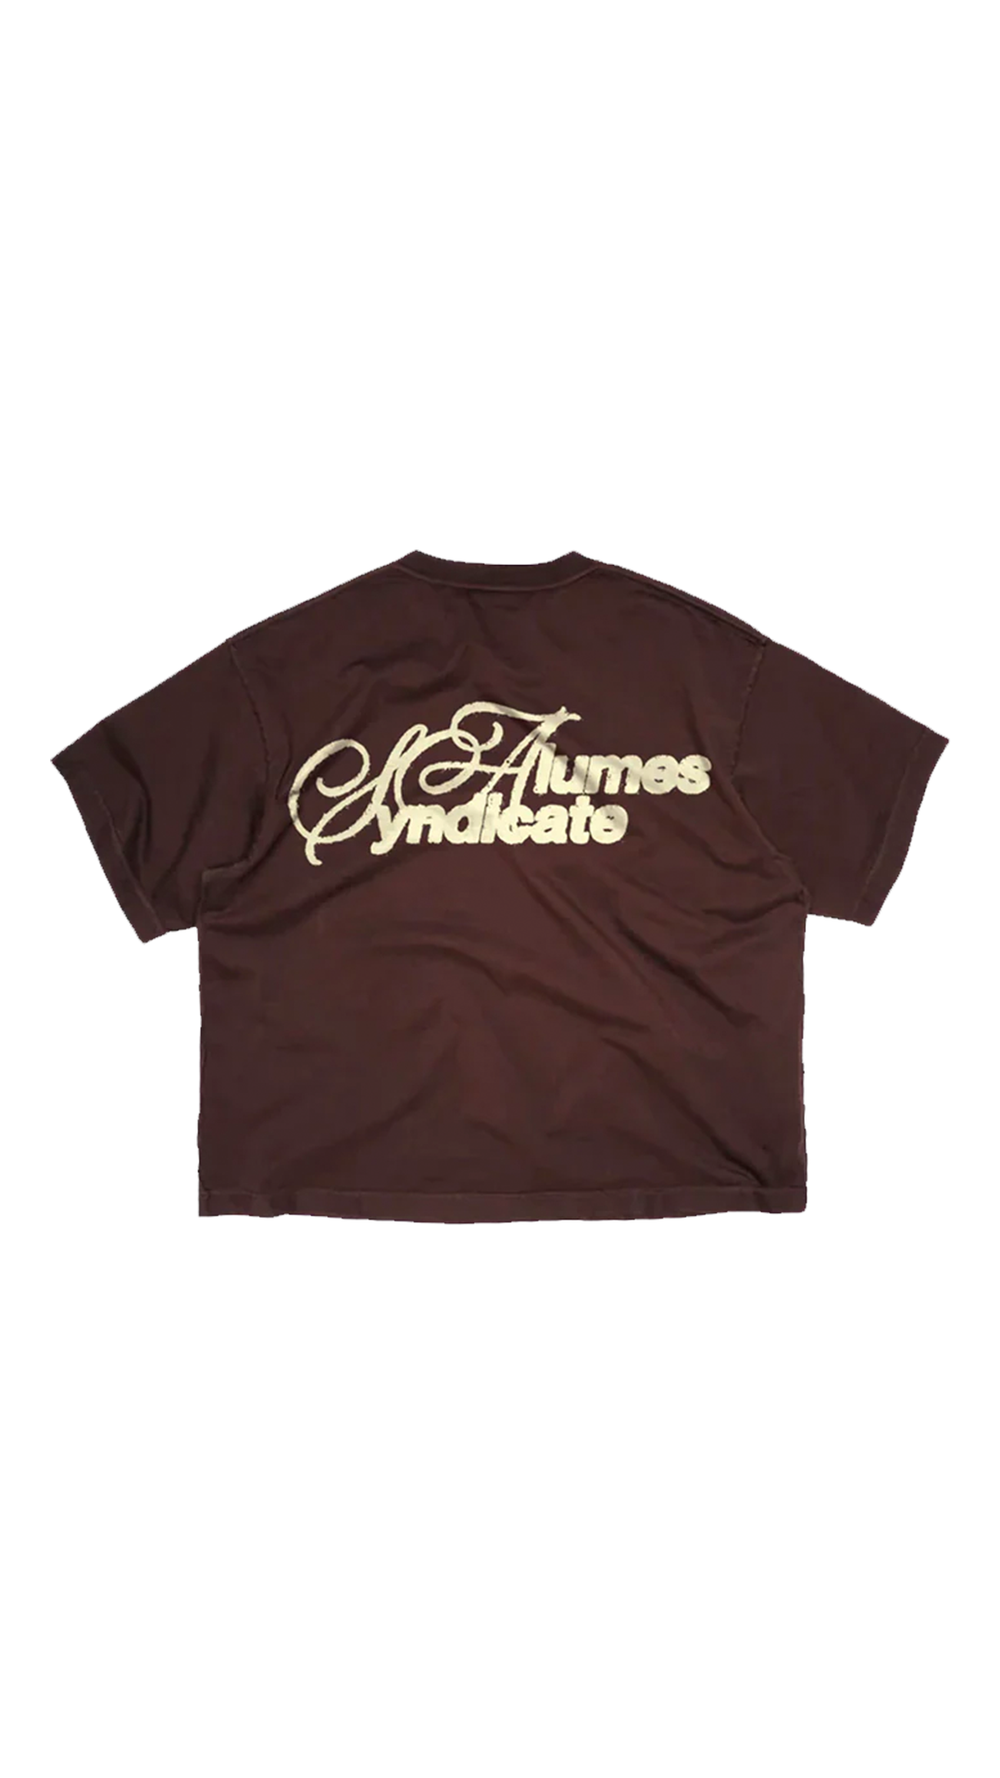 ALUMES SYNDICATE T-SHIRT BROWN